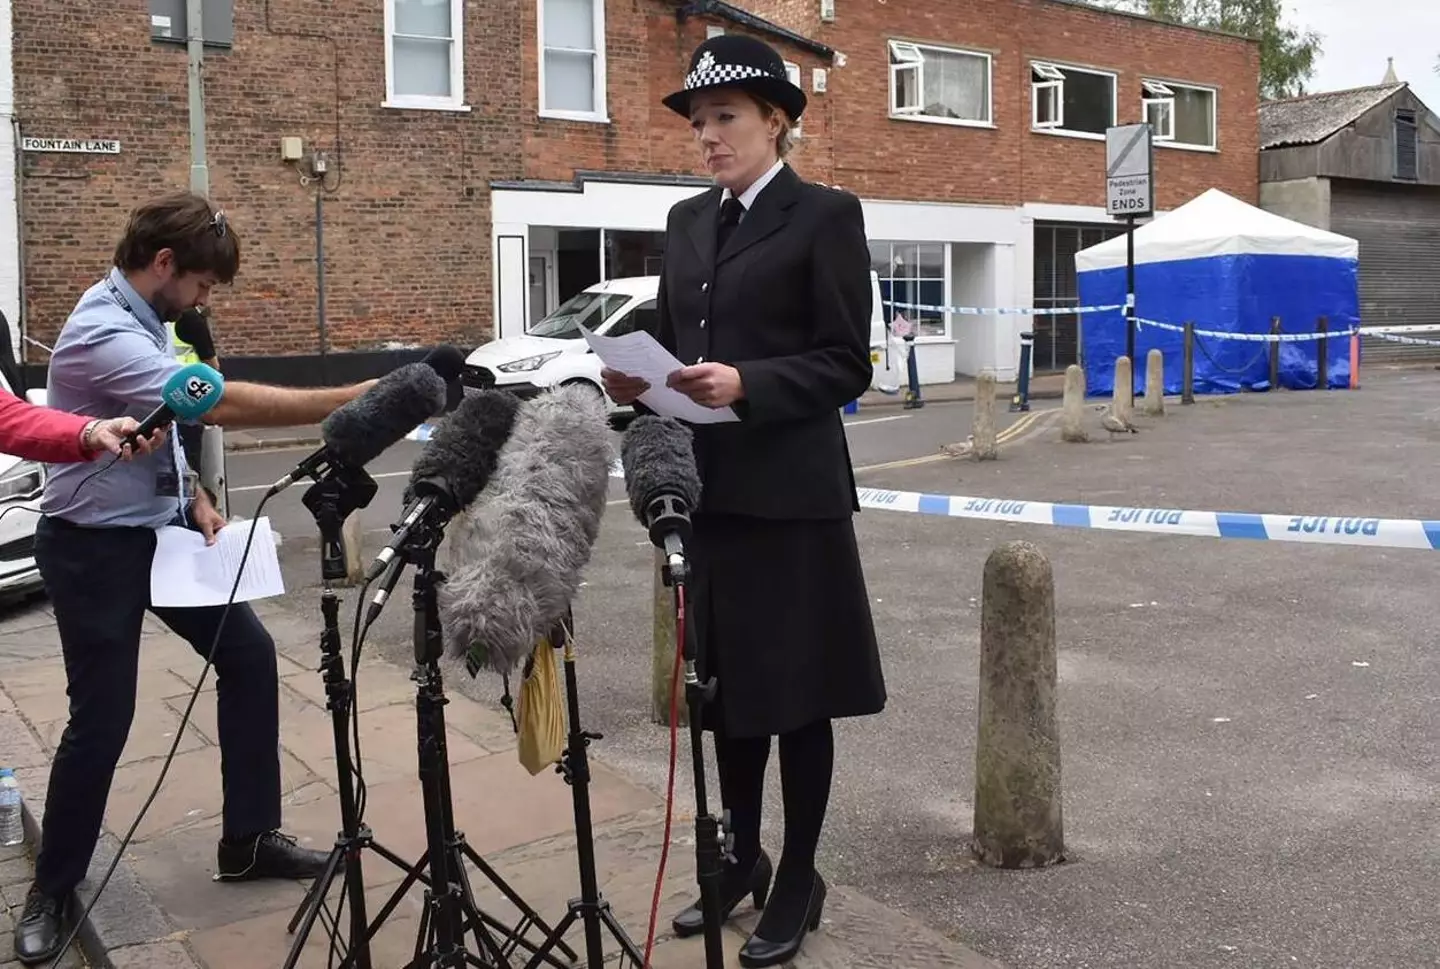 Chief Superintendent Kate Anderson confirmed the identity of Lillia earlier this week.